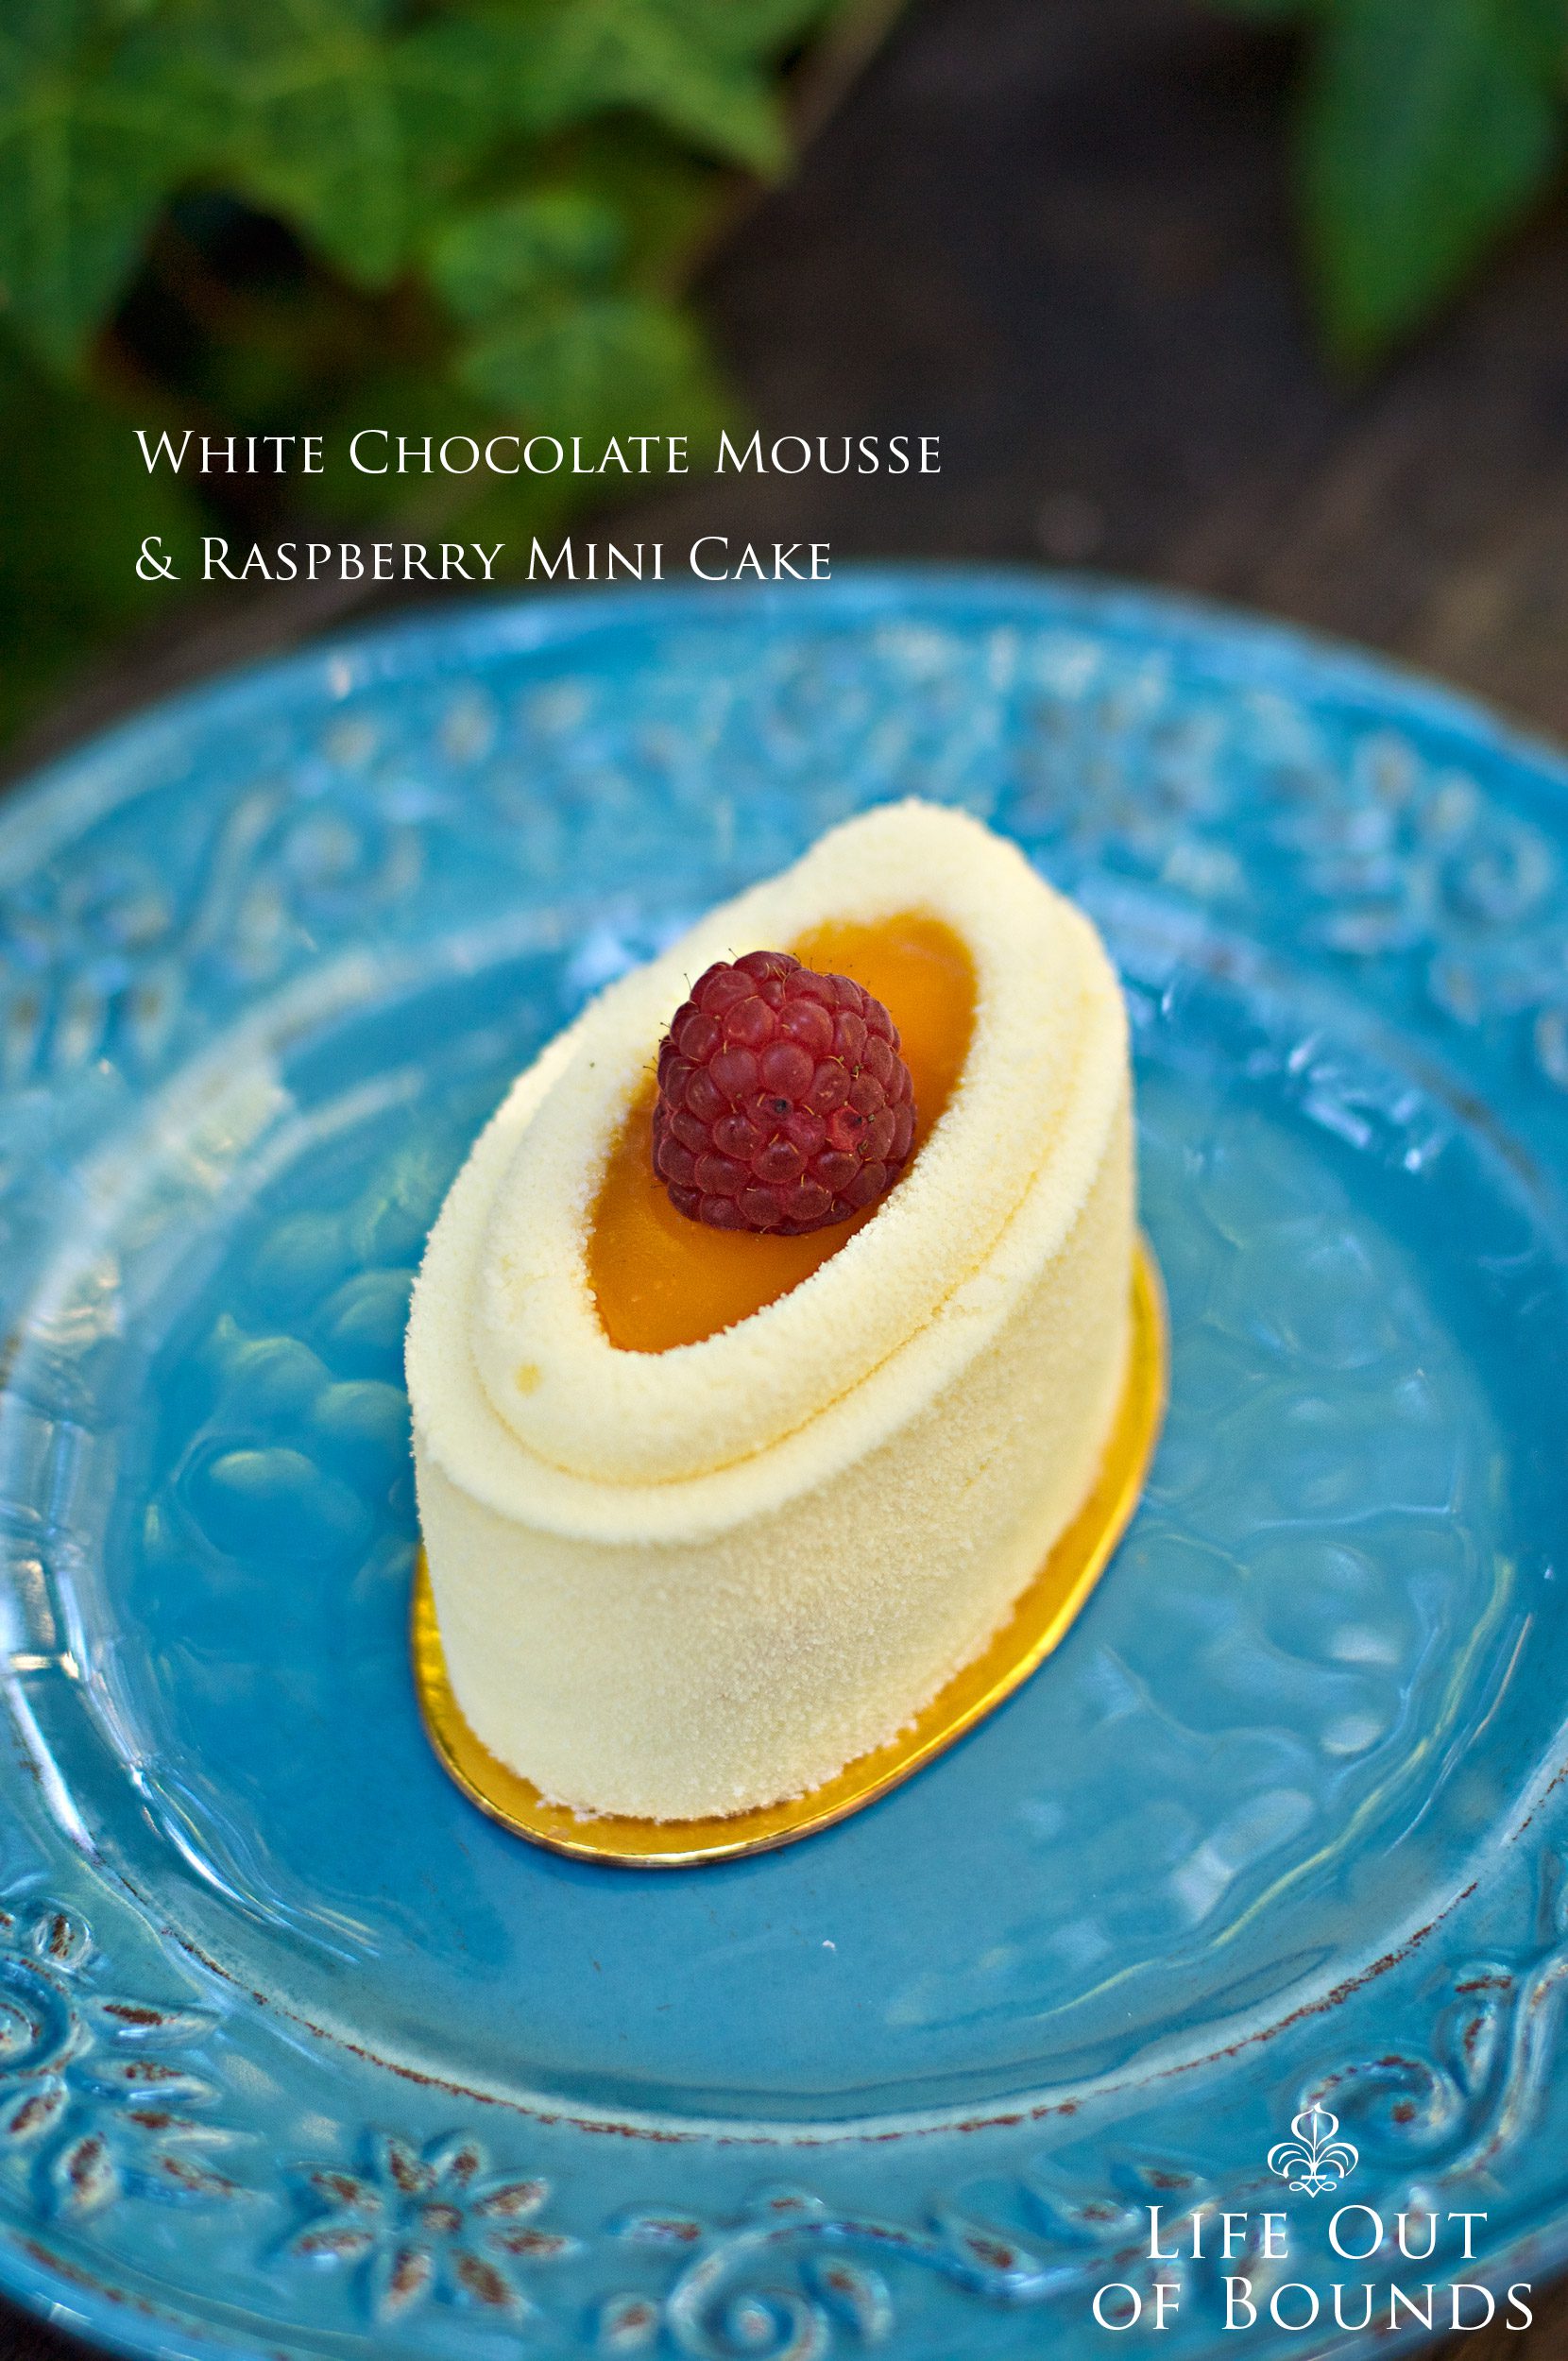 White-Chocolate-Mousse-and-Raspberry-Mini-Cake-by-Parker-Lusseau-Bakery-and-Cafe-in-Monterey-California